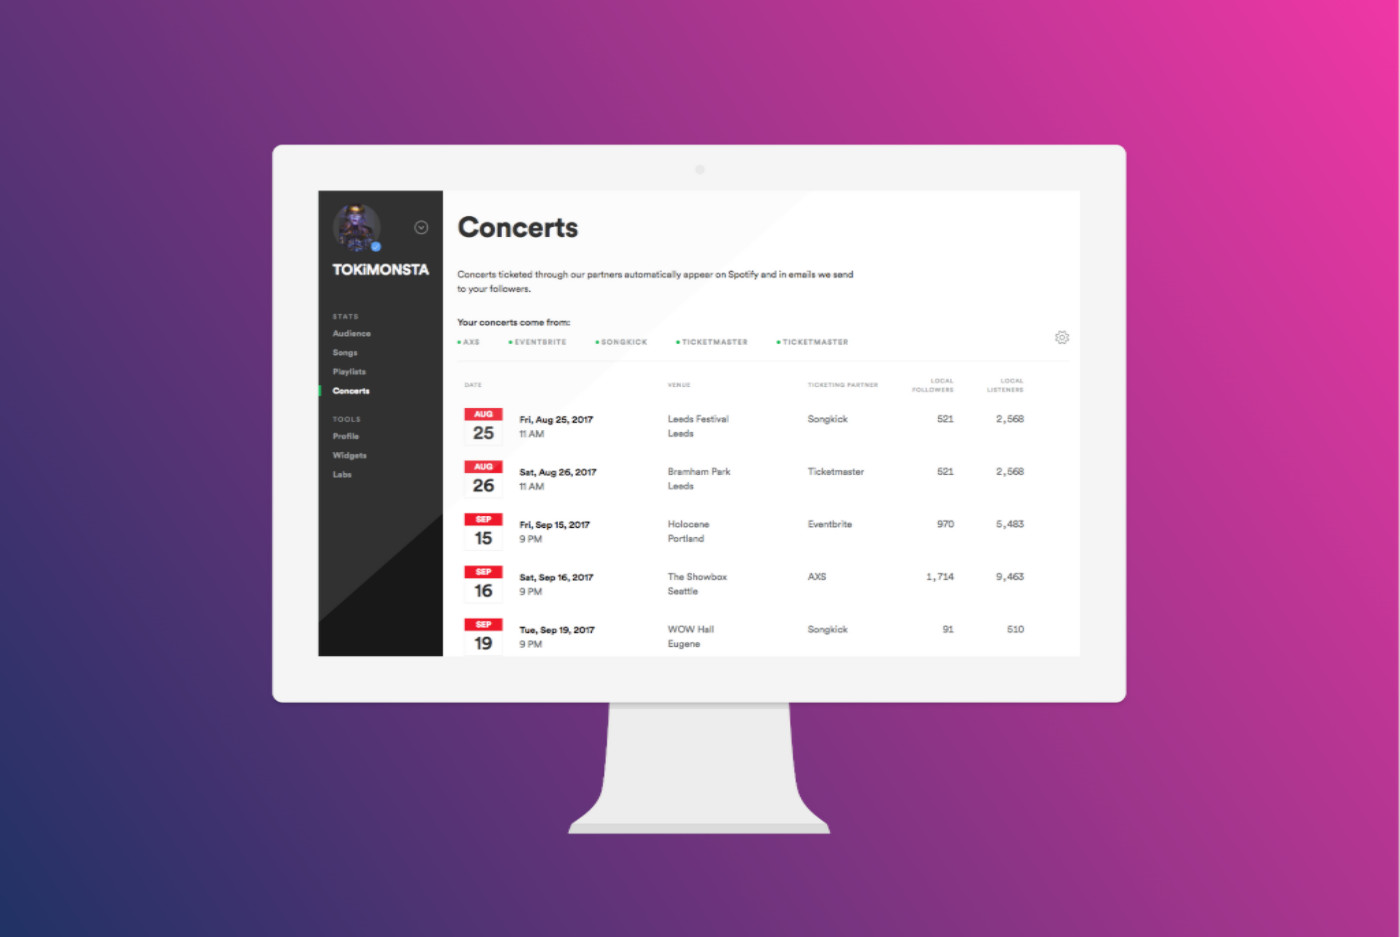 Set up your concerts on Spotify to reach out to fans